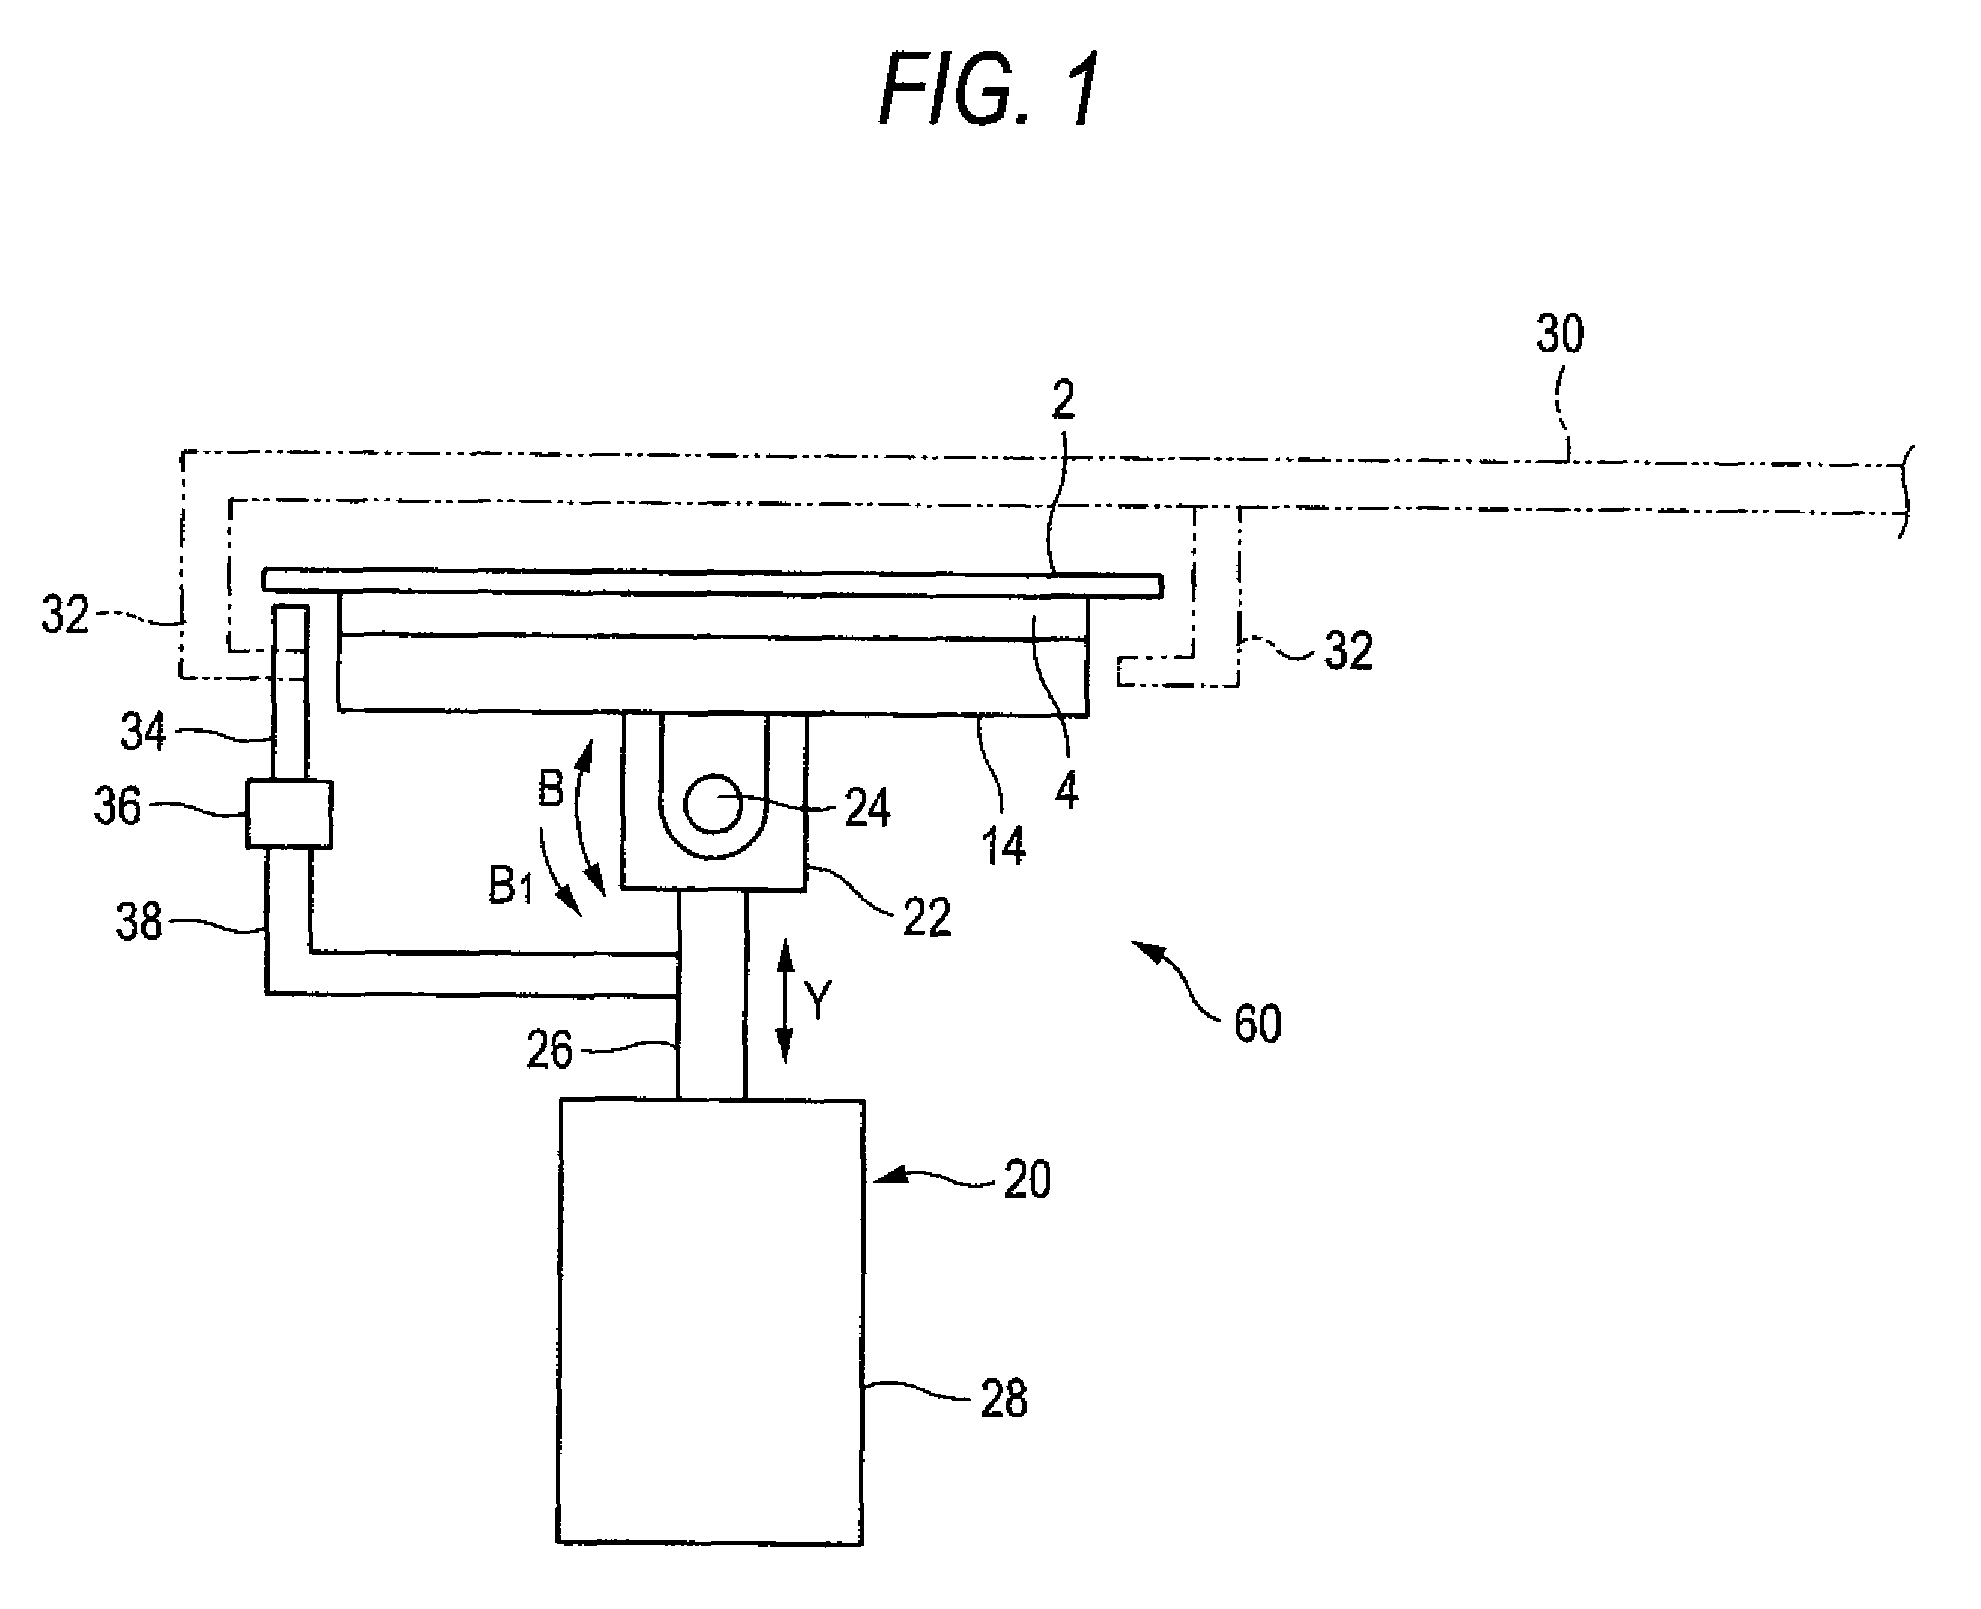 Substrate hold apparatus and method for judging substrate push-up state